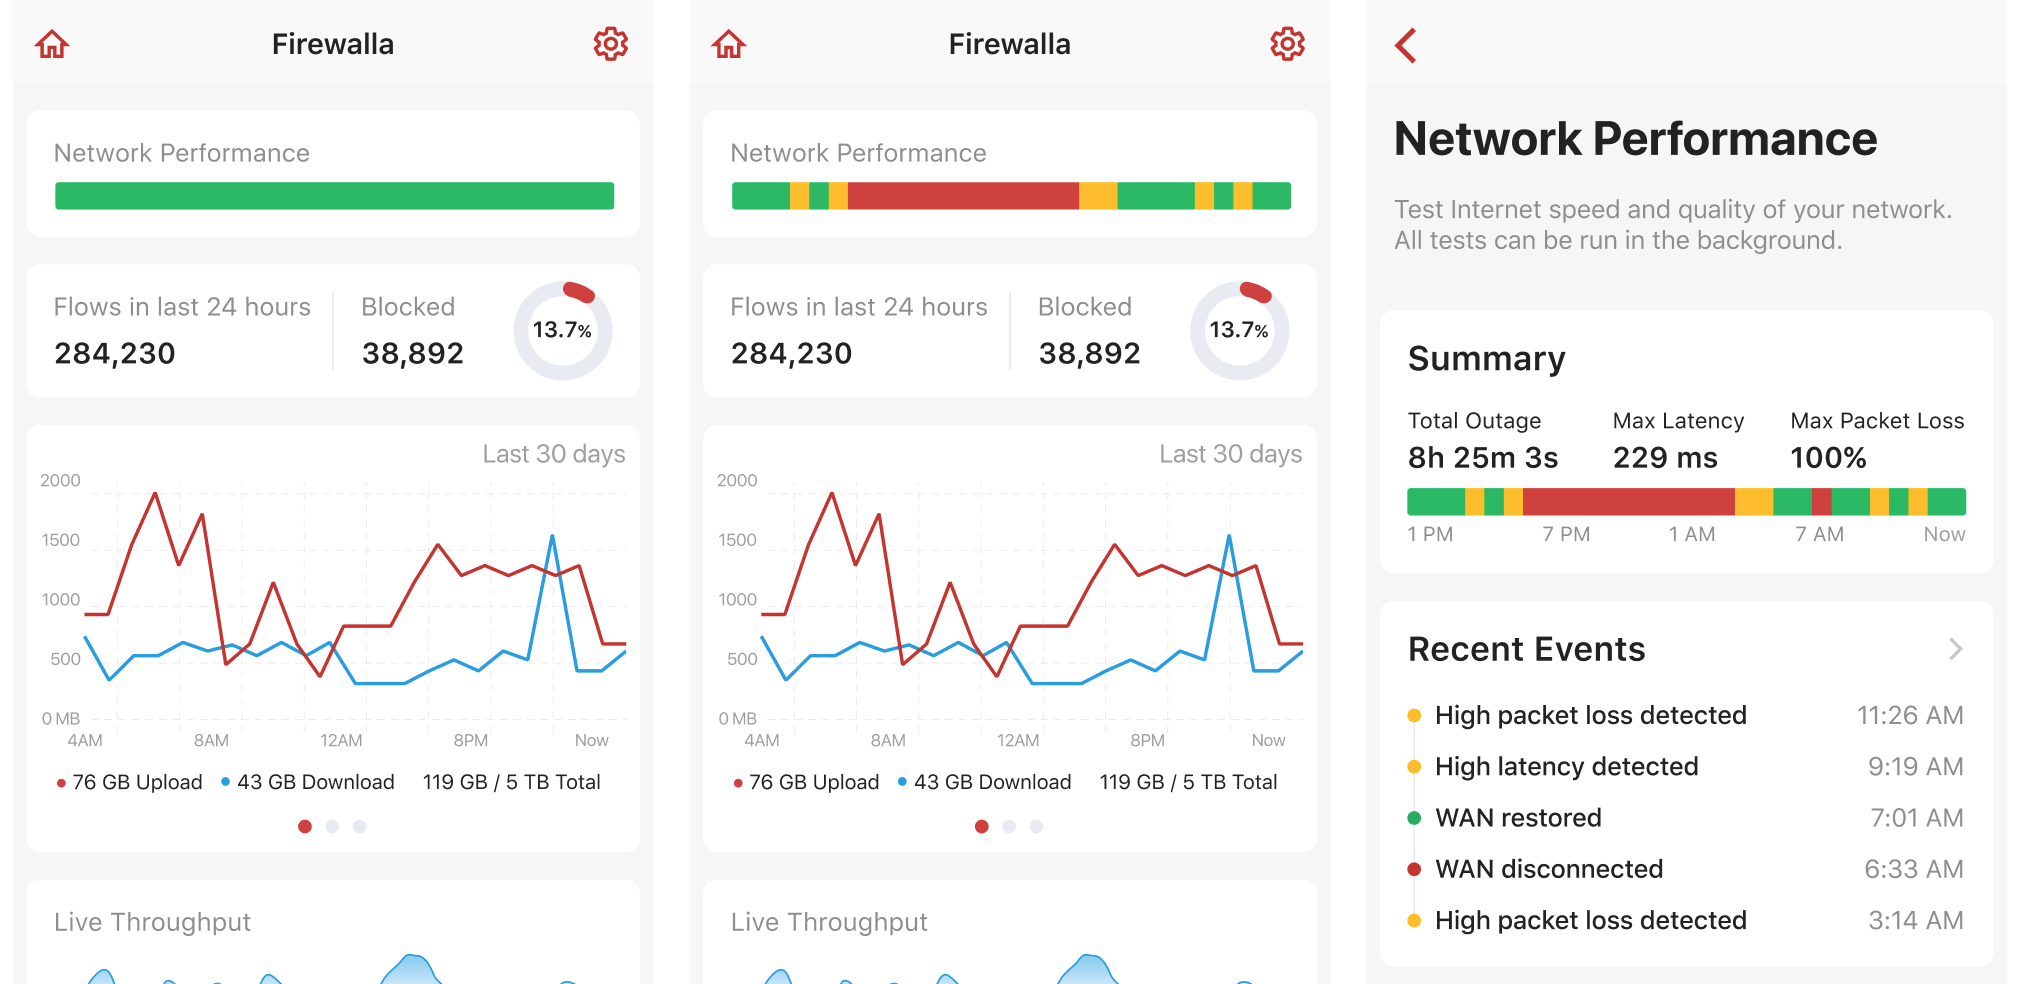 Firewalla Network Performance with two new events, high latency event & high packet loss event